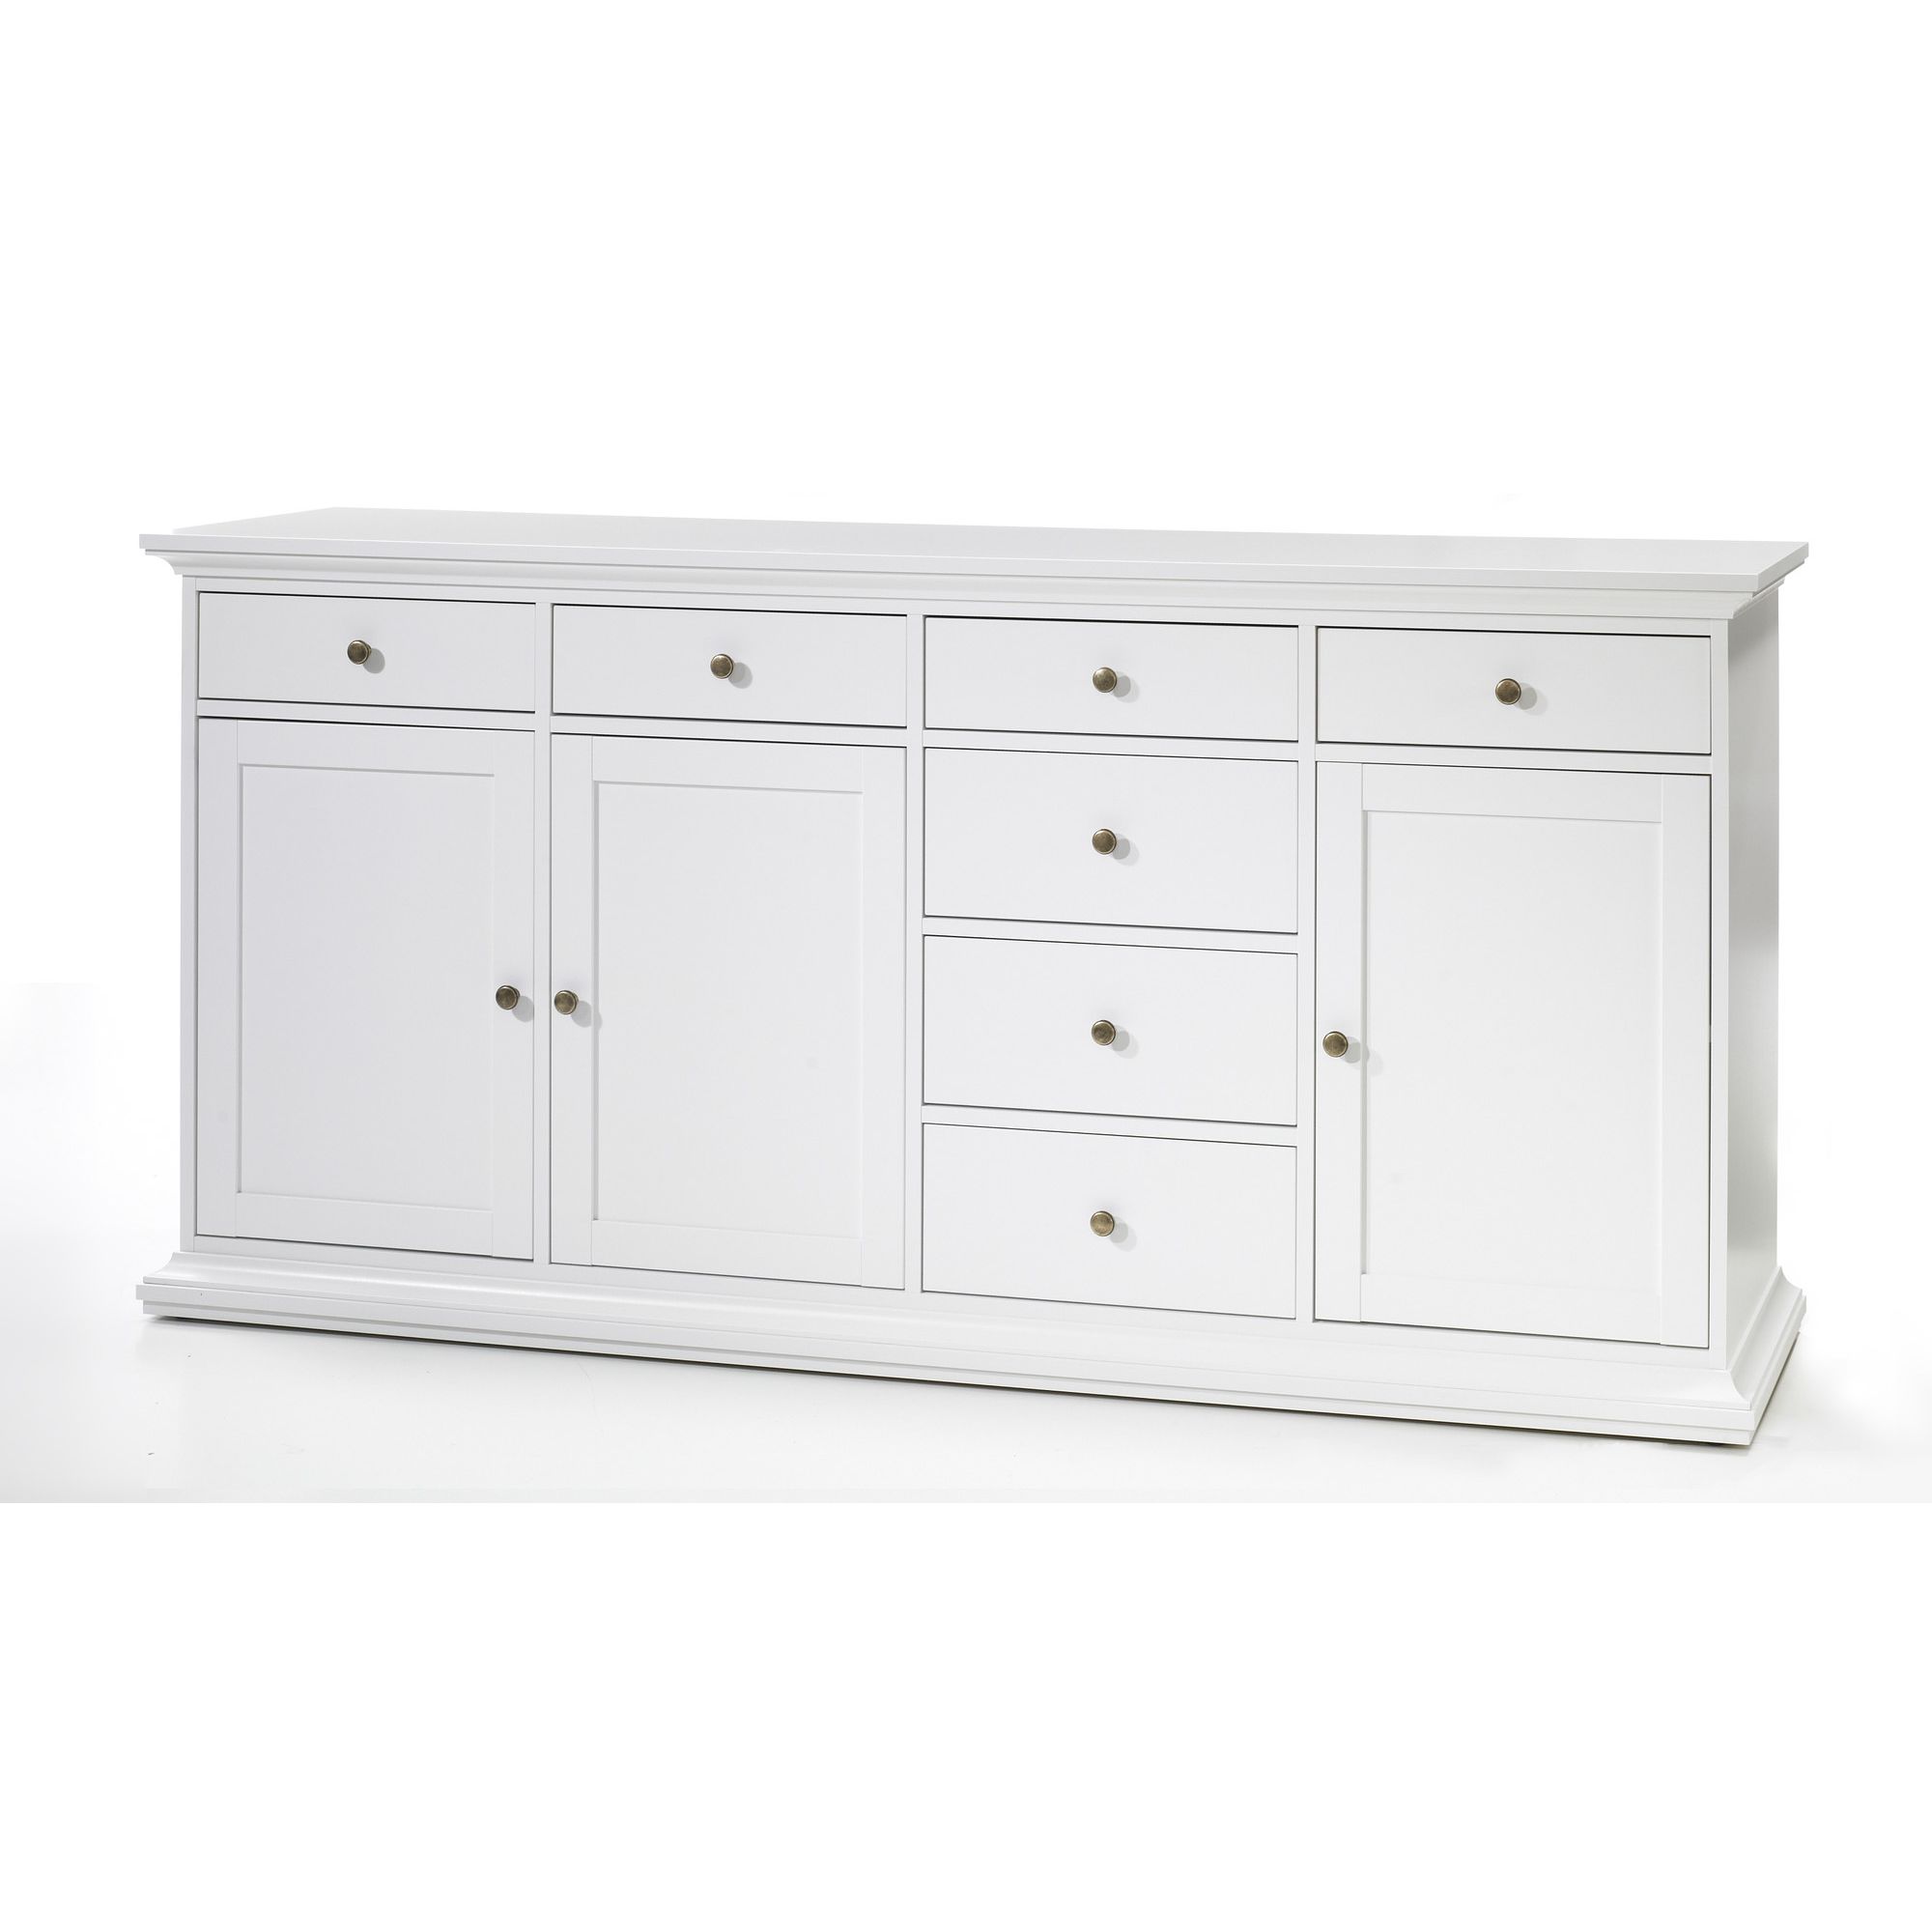 Tvilum Paris Sideboard with Three Doors and Seven Drawers in White at Tesco Direct